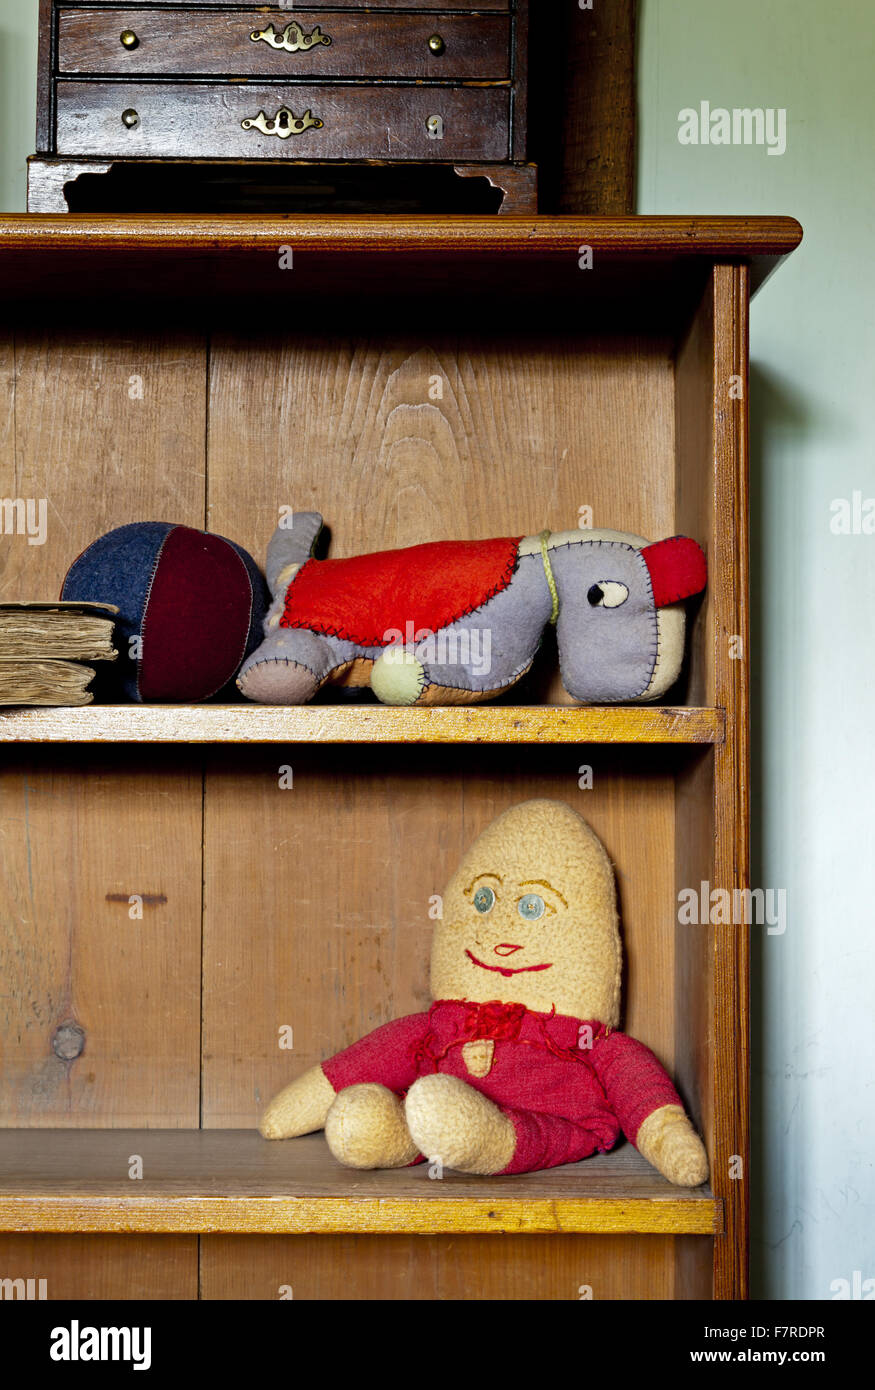 Toys on shelves in the Nursery at Eyam Hall and Craft Centre, Derbyshire. Eyam Hall is an unspoilt example of a gritstone Jacobean manor house, set within a walled garden. Stock Photo